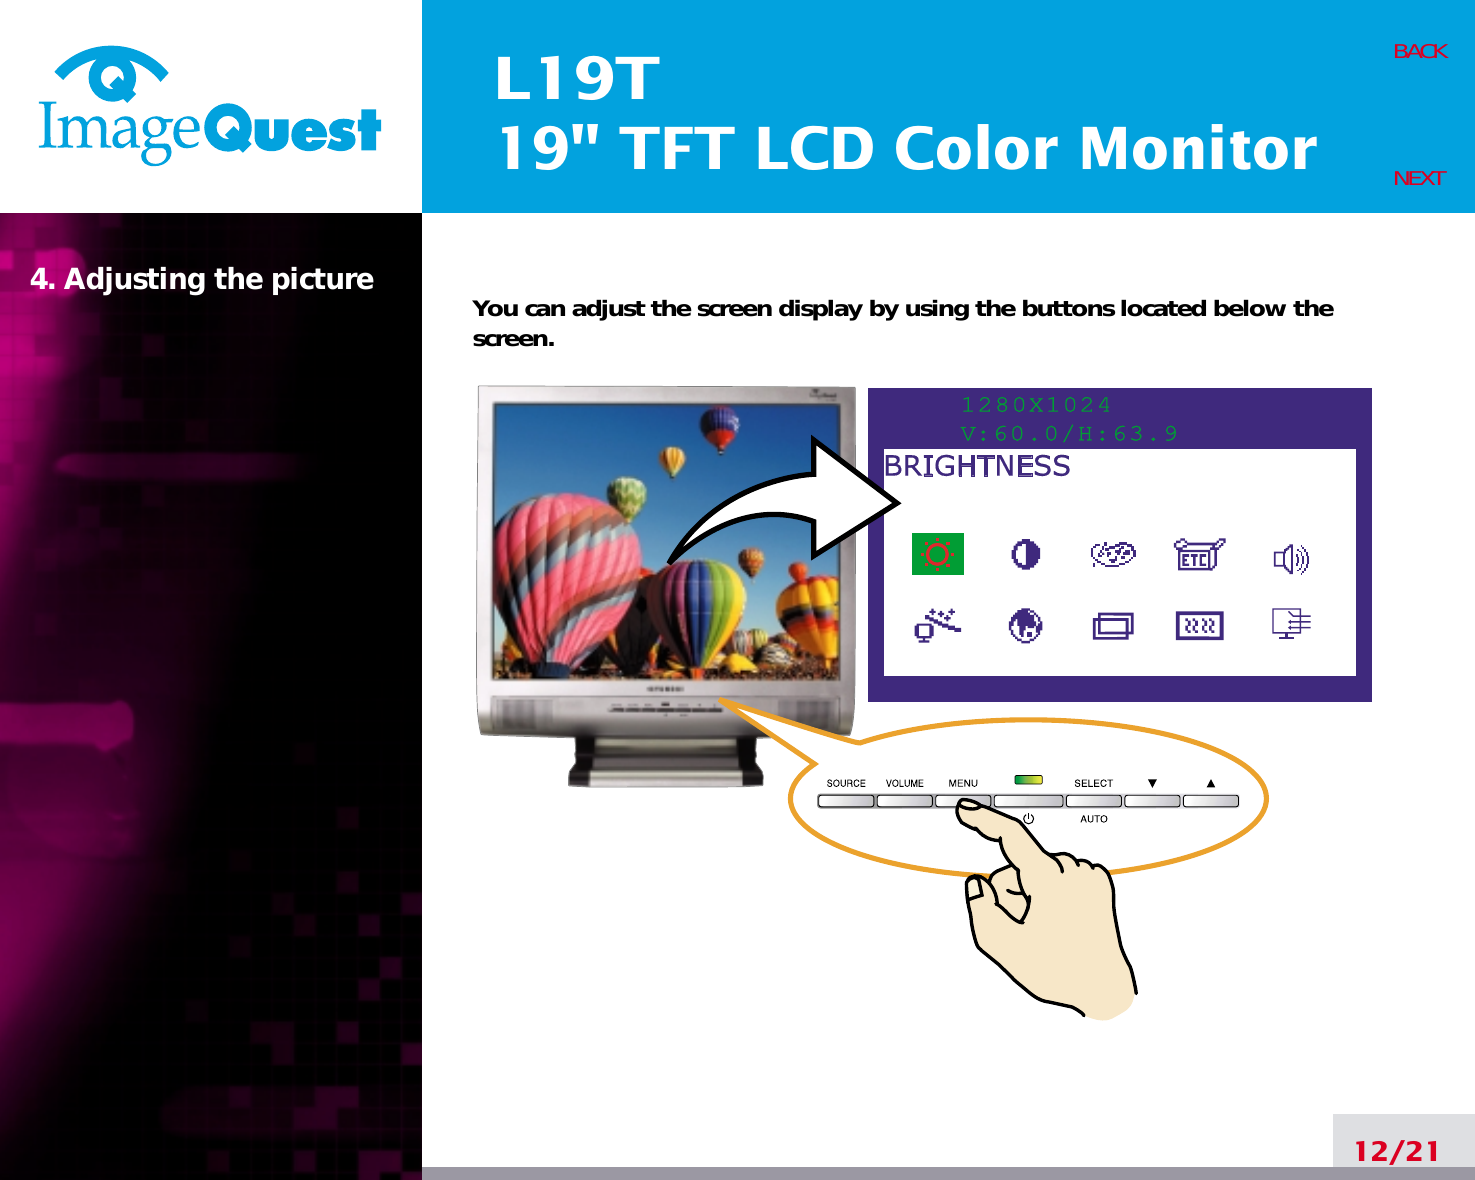 L19T19&quot; TFT LCD Color Monitor4. Adjusting the picture12/21BACKNEXTYou can adjust the screen display by using the buttons located below thescreen.1280X1024V:60.0/H:63.9